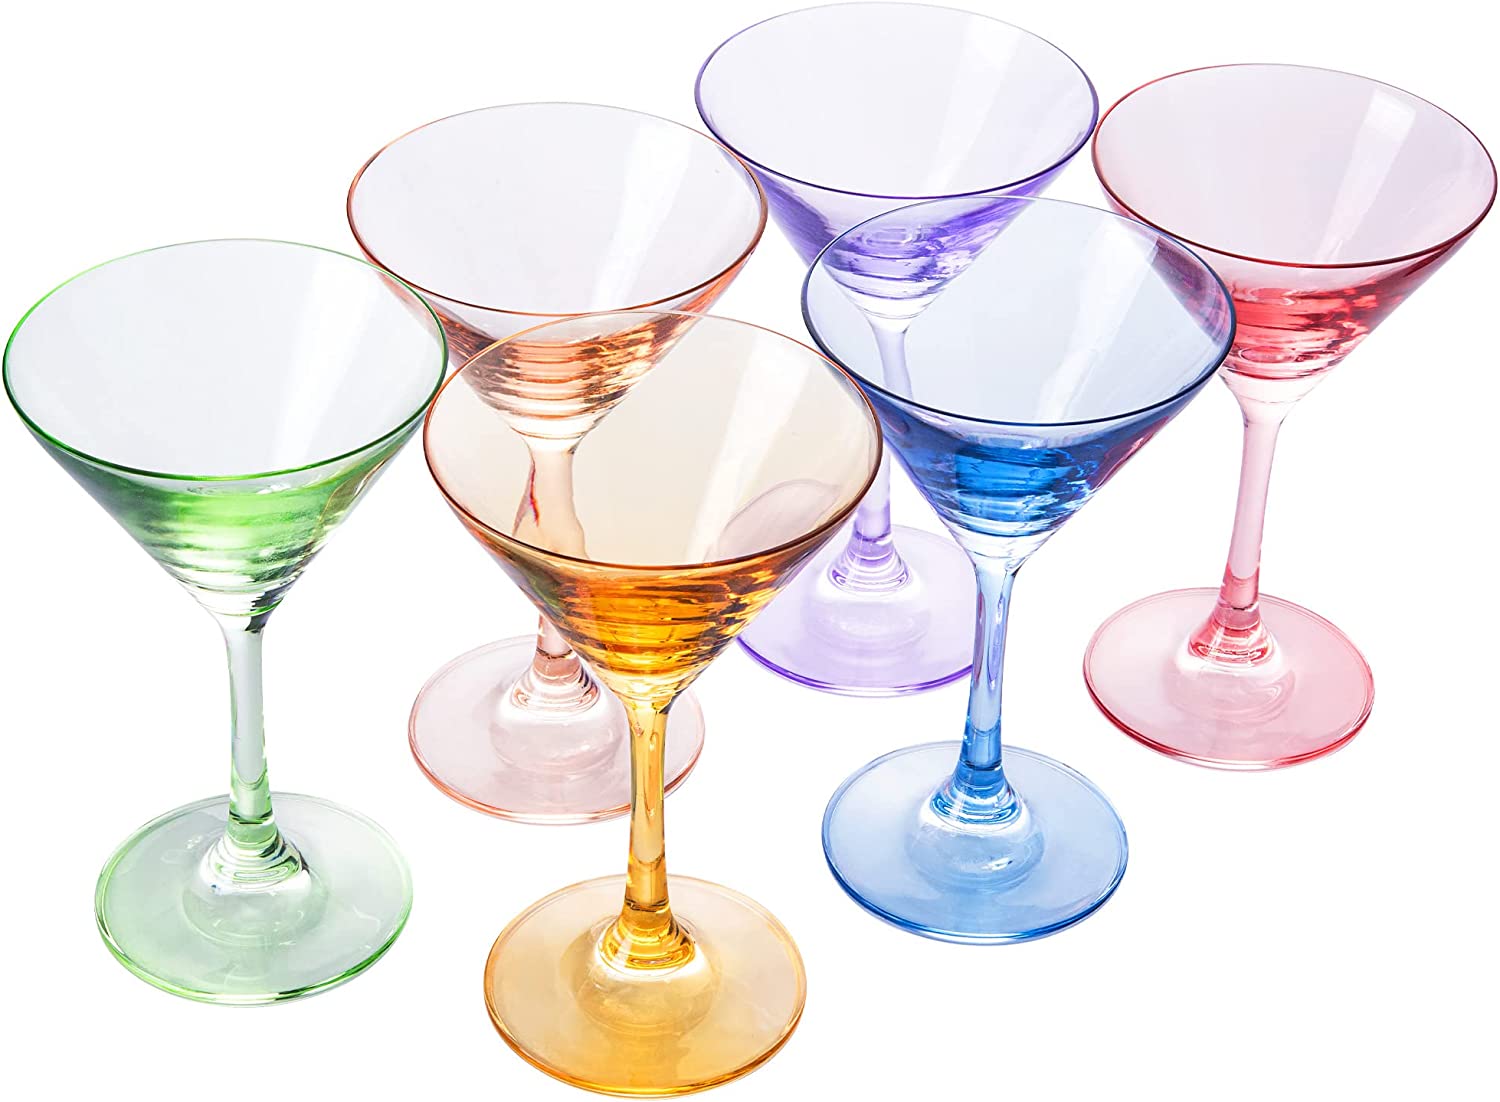 Martini Glasses Set of 6 Novelty Bent Stems in Clear and Green 7 5/8 Tall